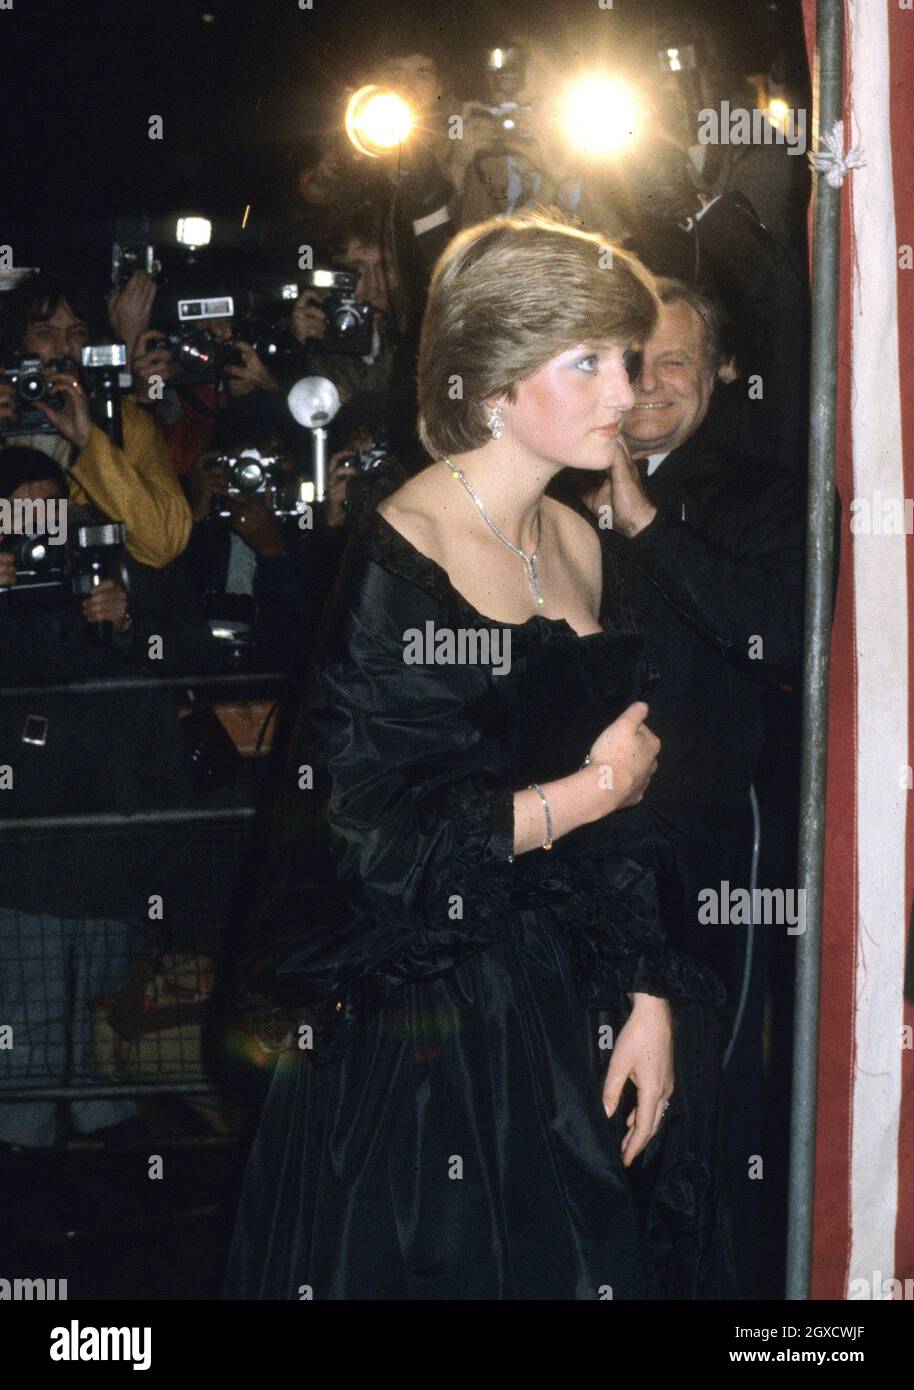 **FILE PHOTO** Lady Diana Spencer, later to become Diana, Princess of Wales, sets the flashbulbs popping as she wears a revealing Emanuel black dress attending her first official engagement with Prince Charles at a fundraising concert at the Goldsmiths Hall in London in March 1981. Designers Elizabeth and David Emanuel are holding an auction of dresses worn by the late Princess Diana. The dresses are to go up for auction on June 8, 2010 in London, at specialist vintage fashion auctioneers Kerry Taylor Auctions.  Stock Photo